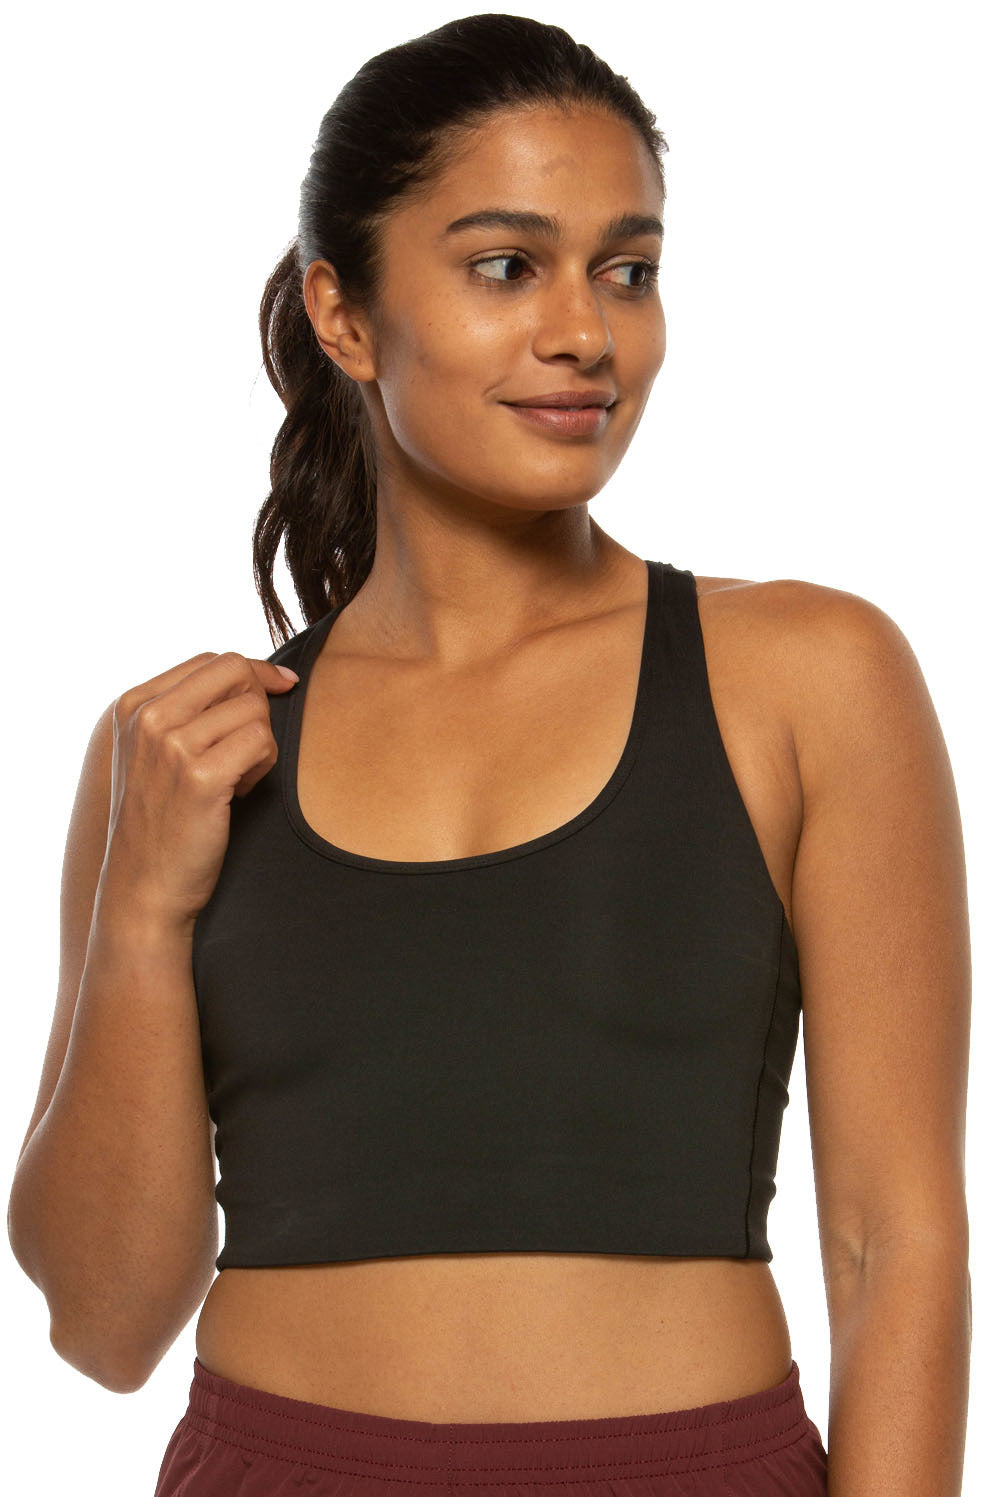 https://cdn.shopify.com/s/files/1/0703/0099/products/Activewear-top_Indy_Side_Black_BLK_112020_1120x.jpg?v=1616610138